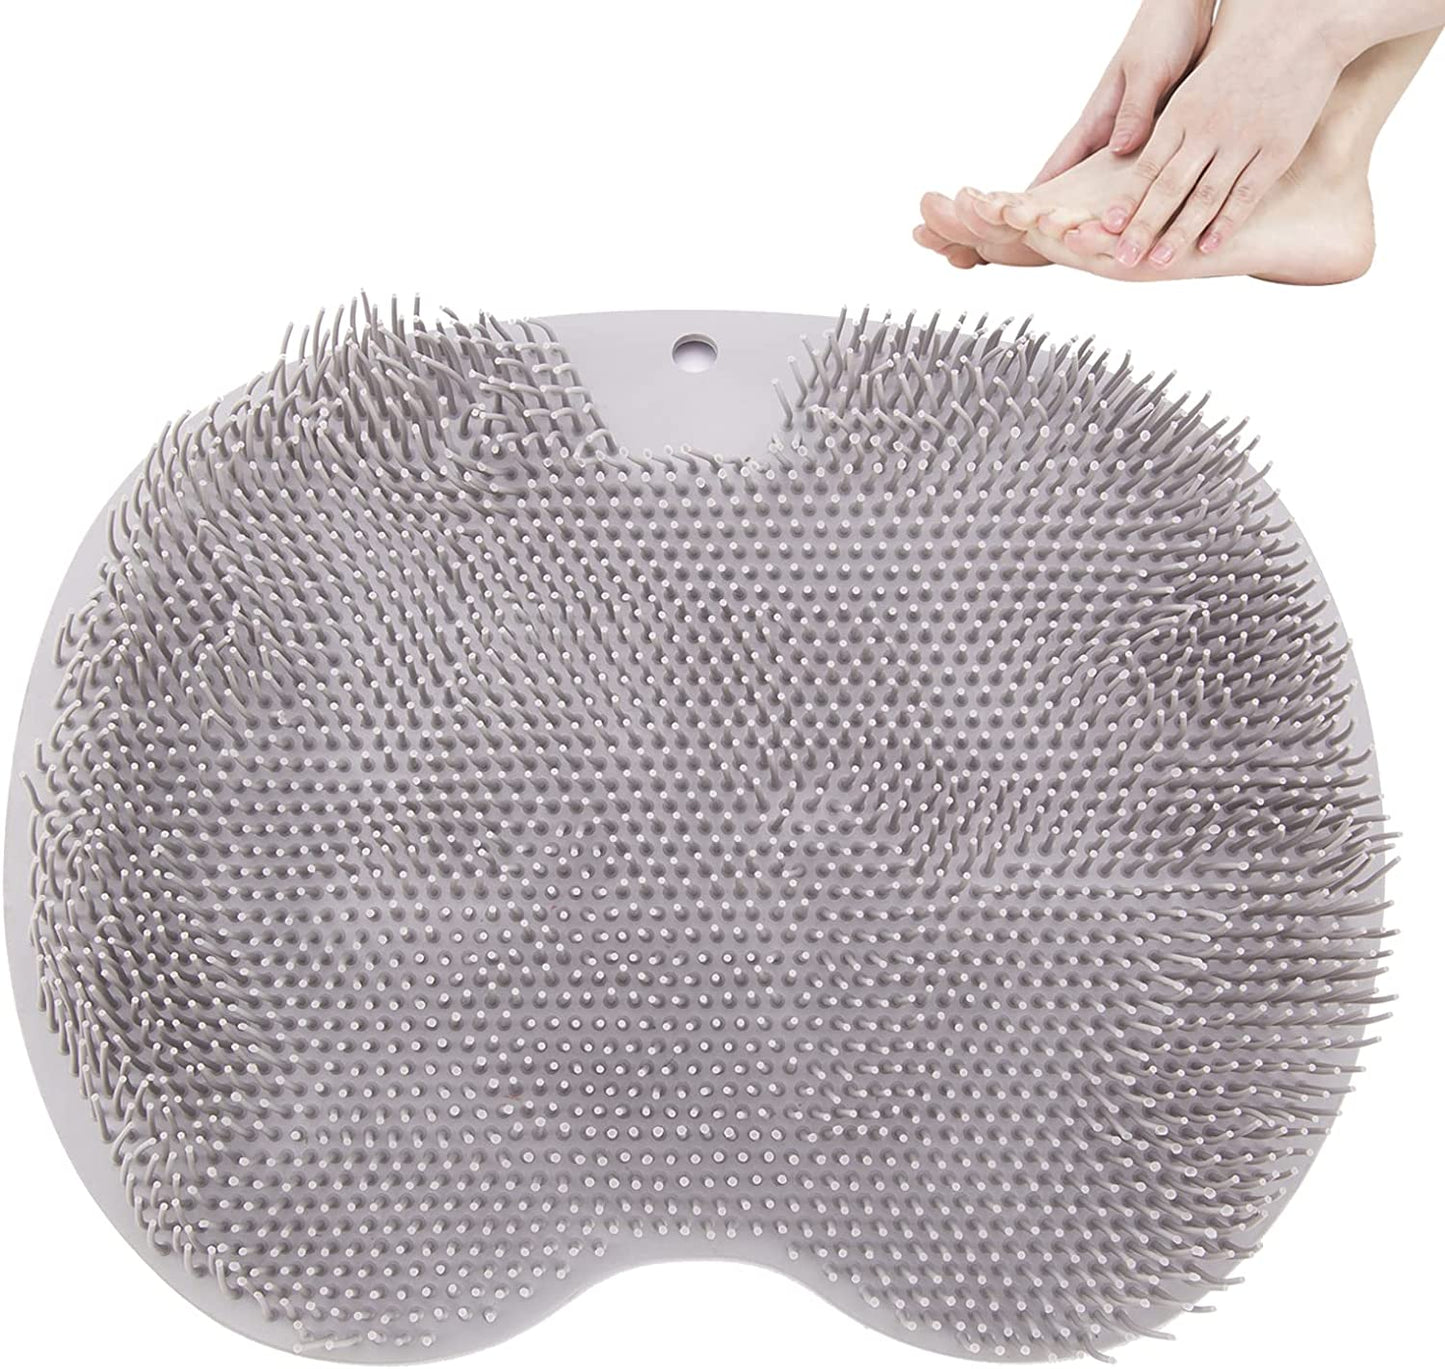 Libara Foot Scrubber for Use in Shower, Shower Foot Scrubber Massager Cleaner, Feet Cleaner Scrubber, Feet-Pain Reduce Massage Pad, Cleaner and Feet Pain